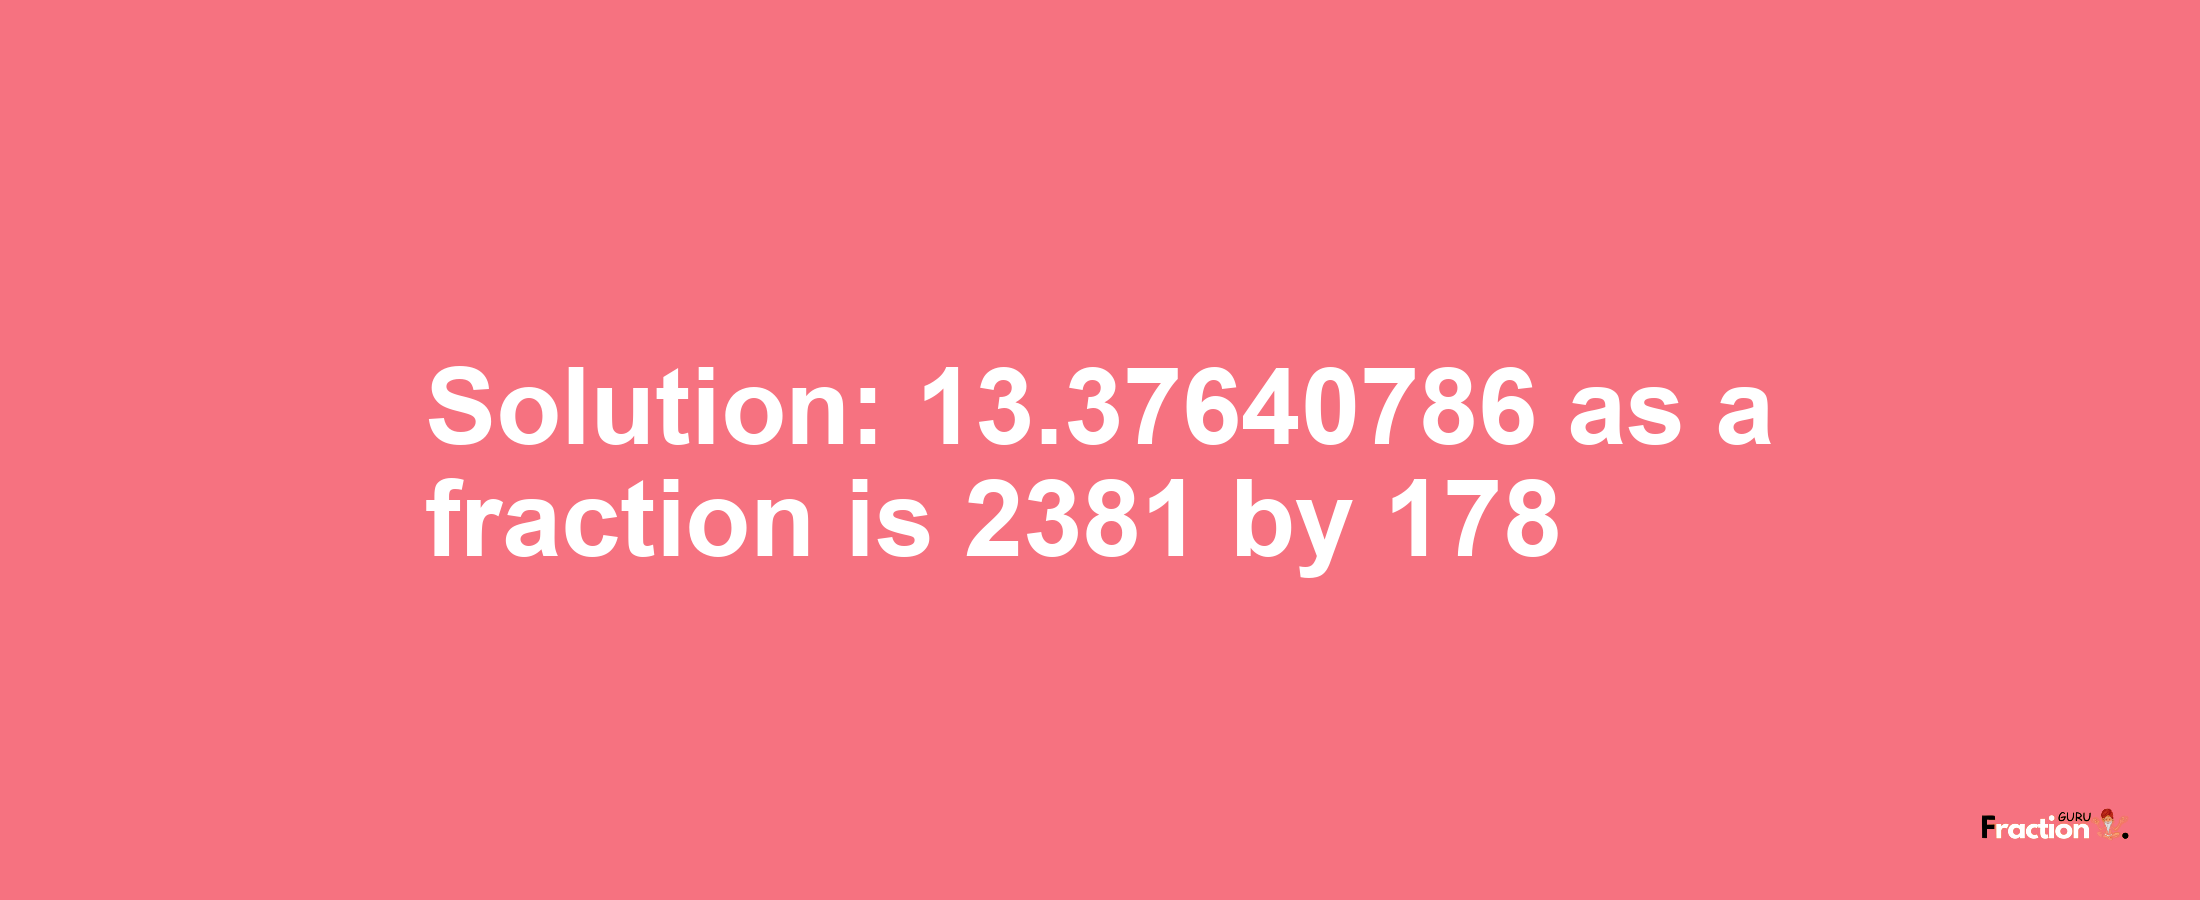 Solution:13.37640786 as a fraction is 2381/178